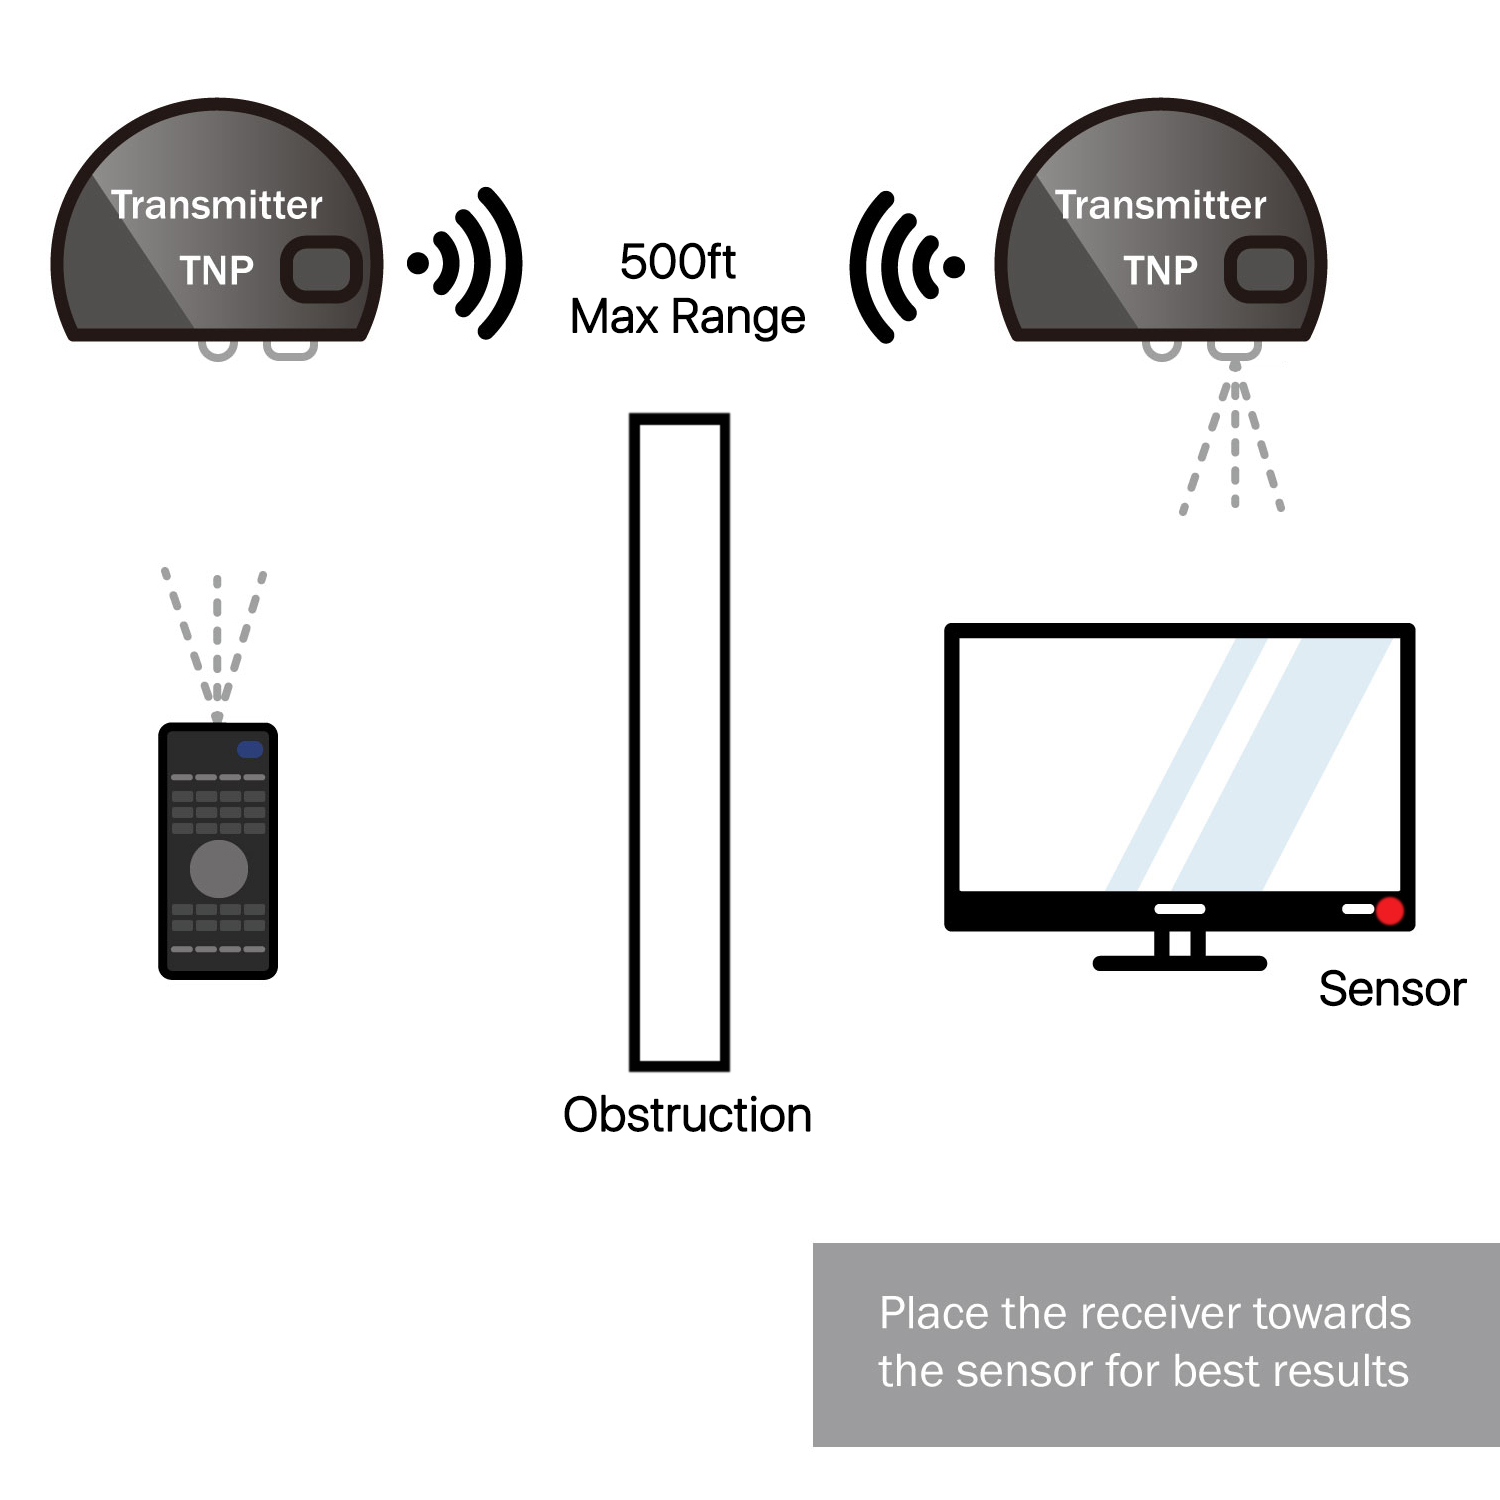 Wireless Remote Control Extender - Wireless ir repeater sensor with highly sensitive receiving angle ensures instant real-time signal transmission without delay